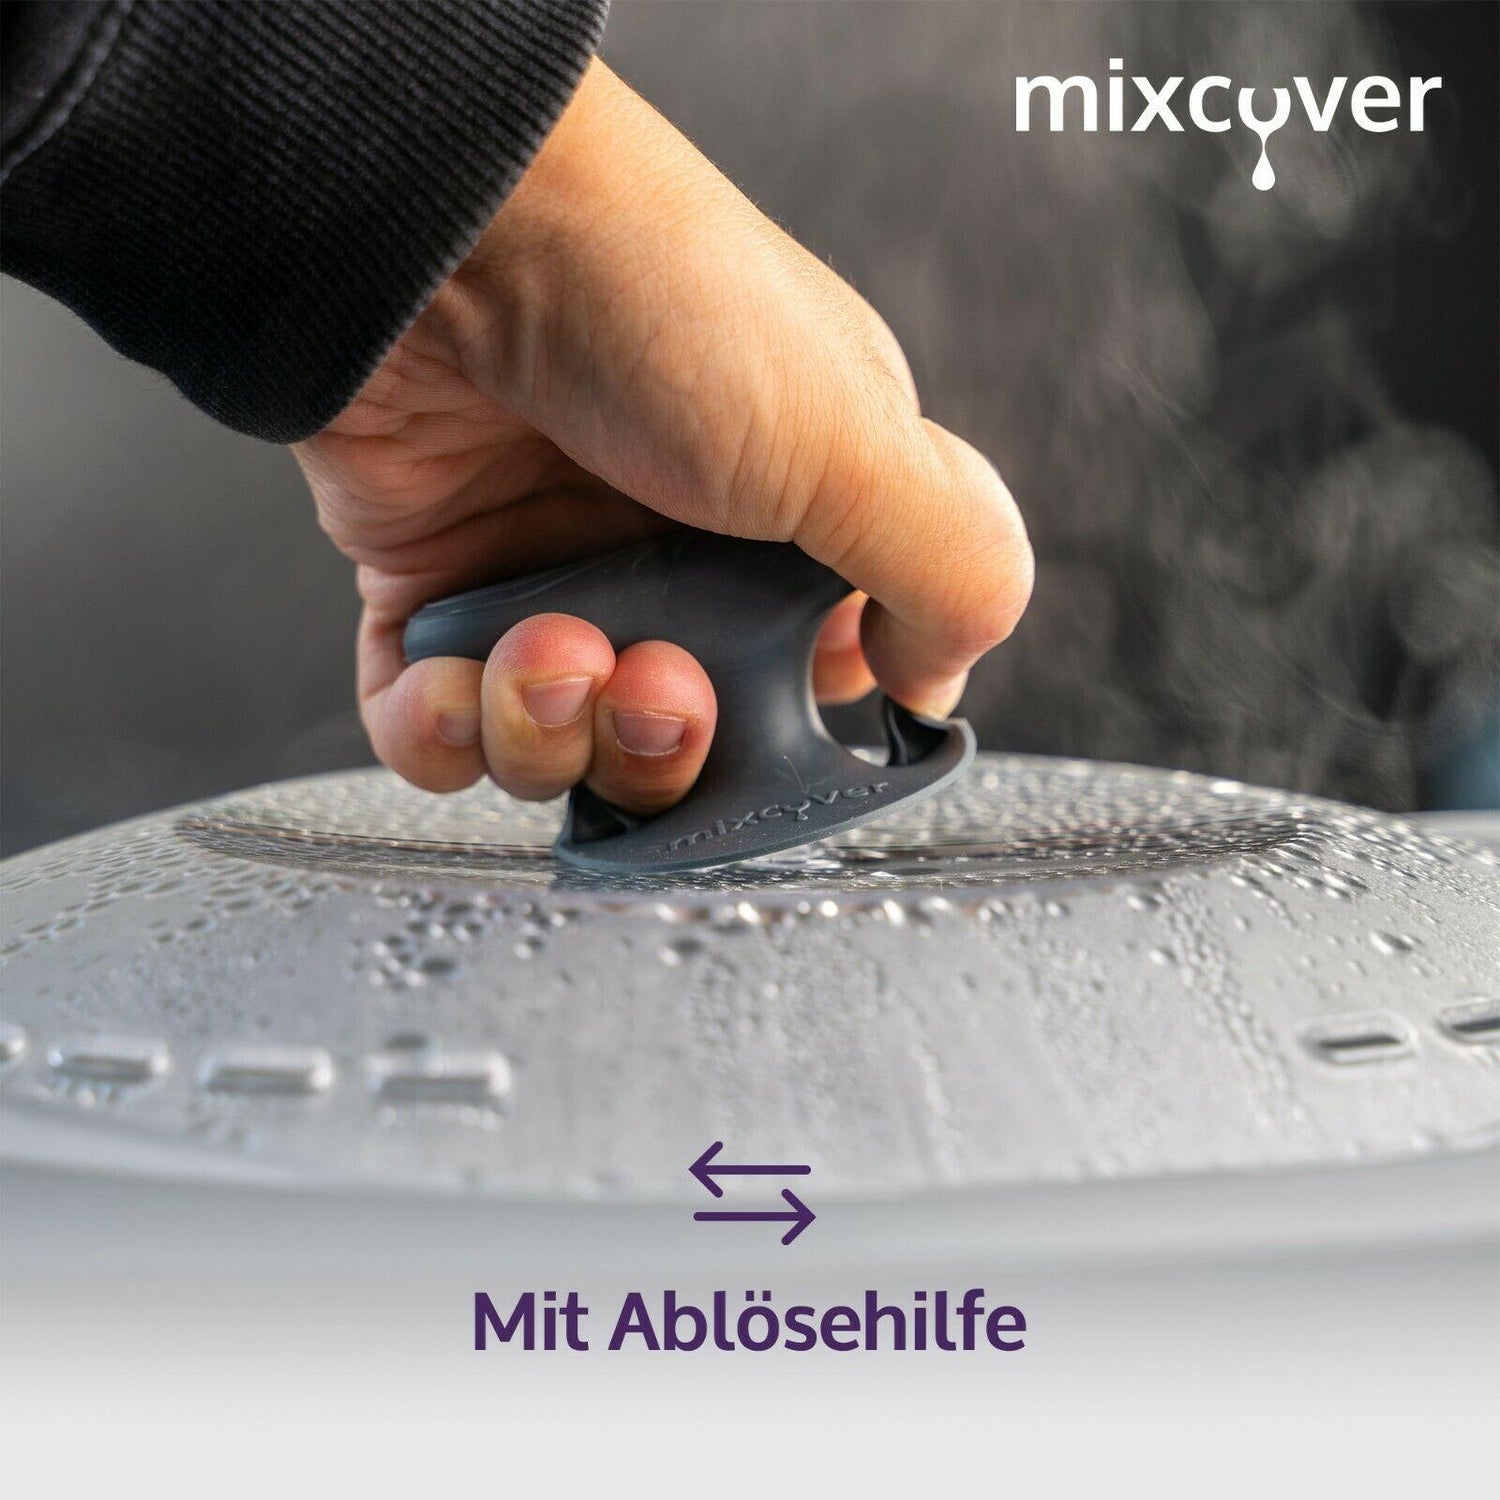 mixcover Thermo-Griff für Varoma oder Dampfgardeckel - Mixcover - Mixcover